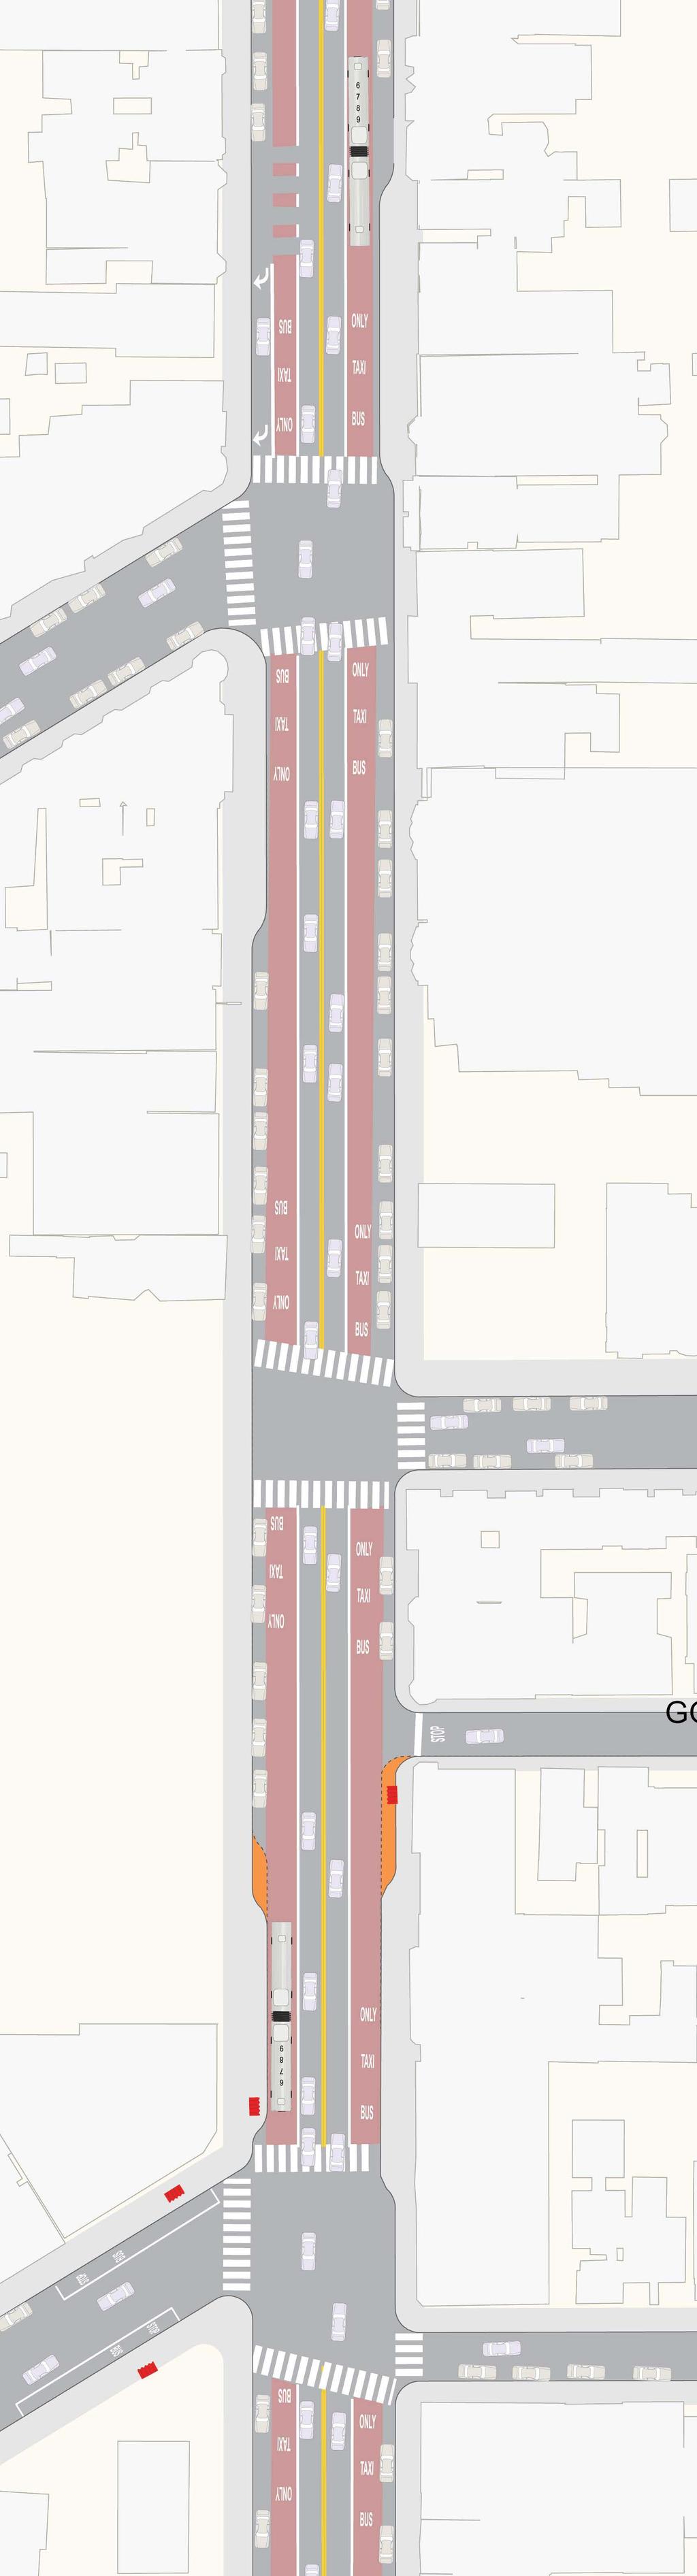 Proposal Detail: 29th to 30th on Mission from César Chávez St to A bus-only lane gives Muni vehicles their own lane separate from regular traffic.